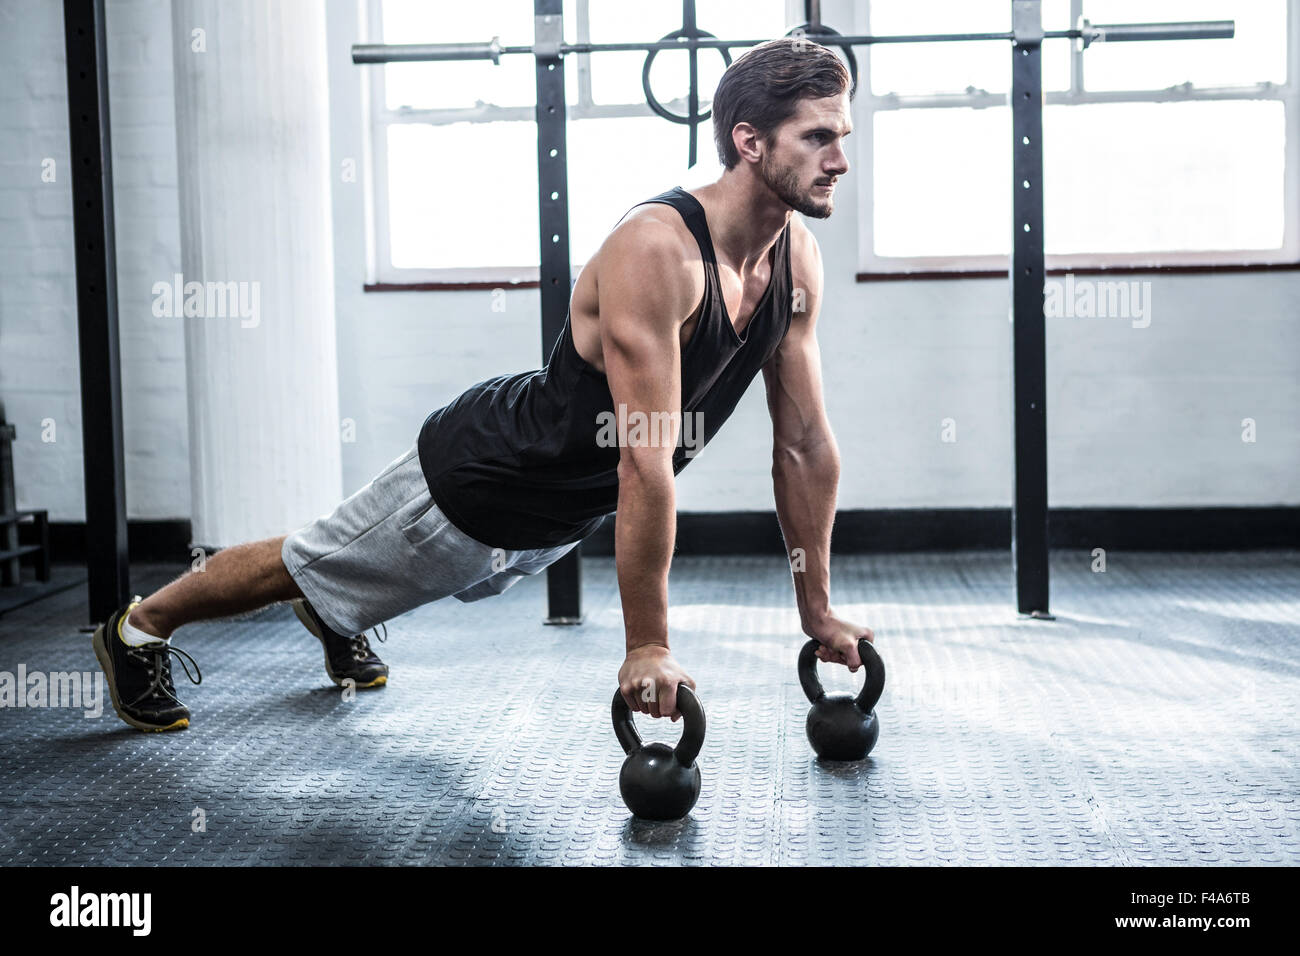 Fit man working out with kettlebells Stock Photo